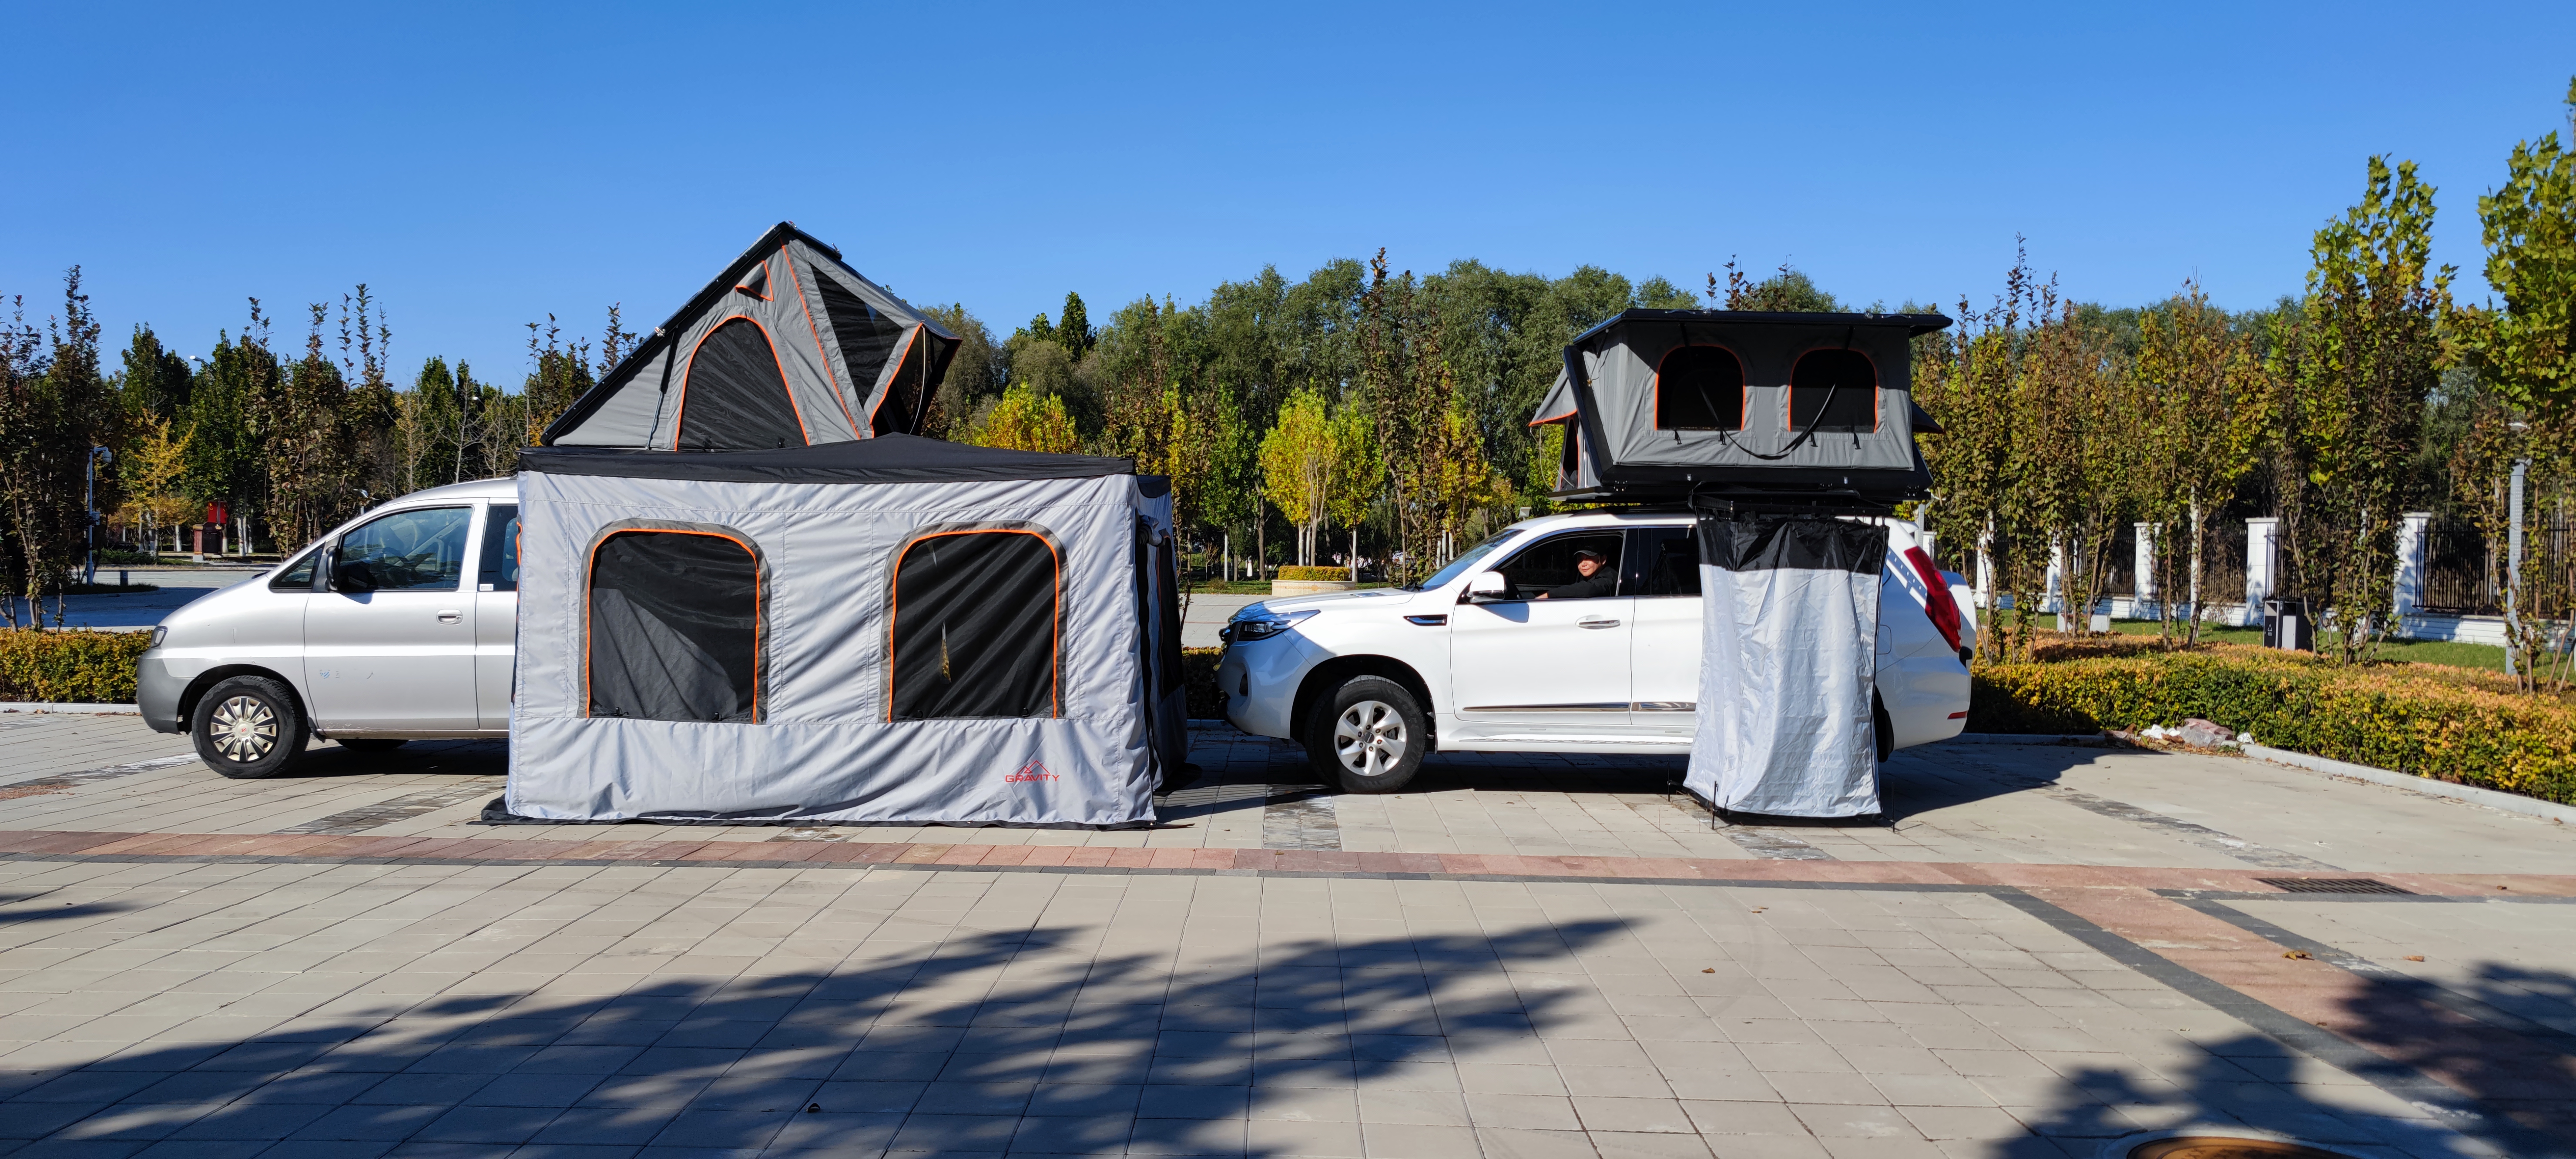 What You Should Know Before Buying a Rooftop Tent!